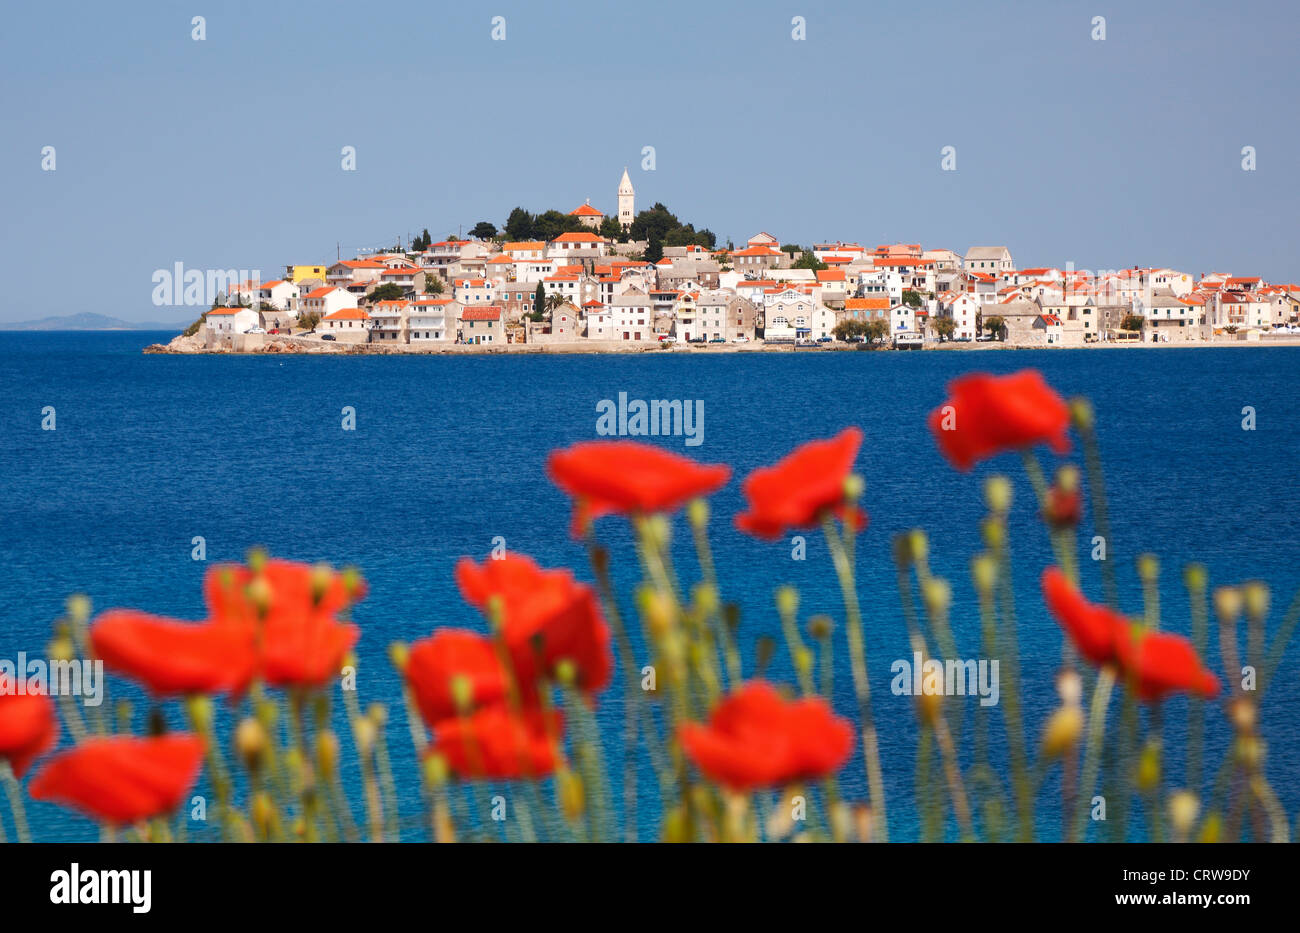 Primosten town with red poppies in front Stock Photo